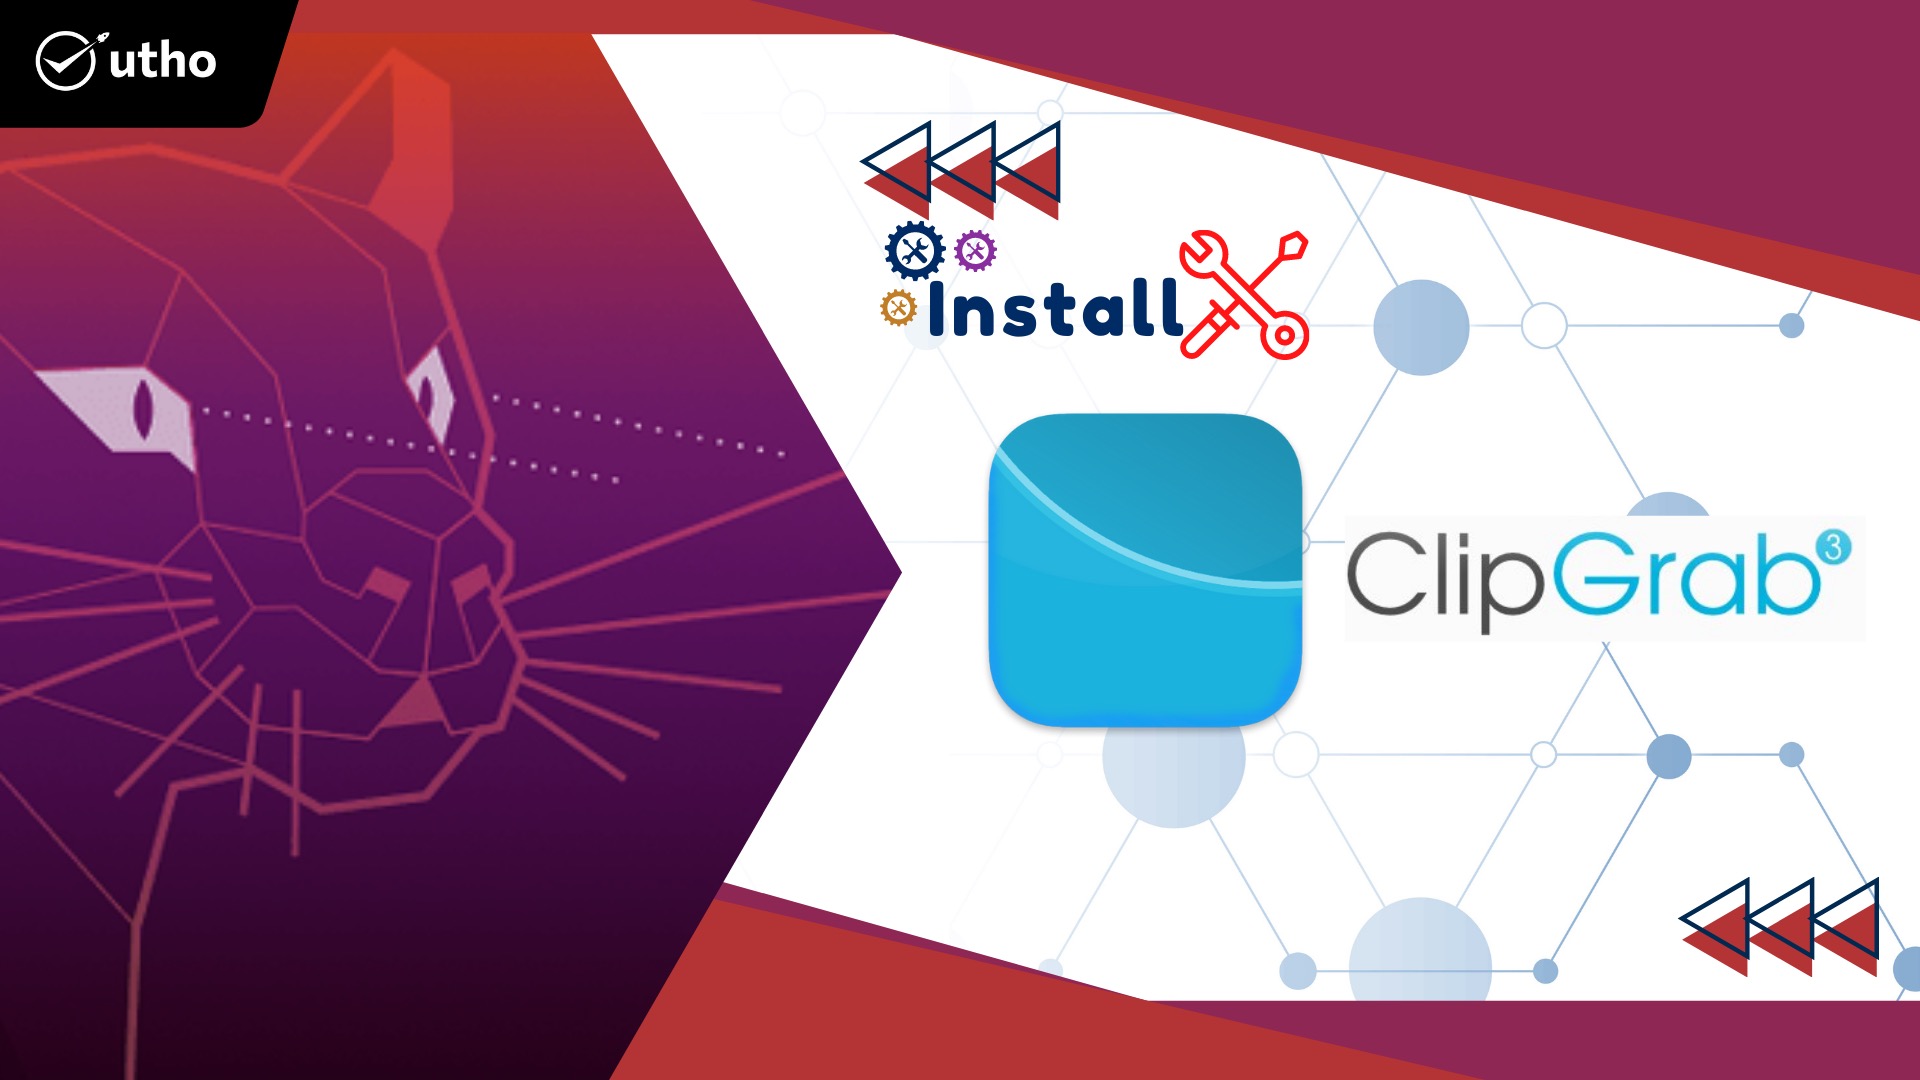 How to Install ClipGrab on Ubuntu 20.04 LTS to Download YouTube Videos